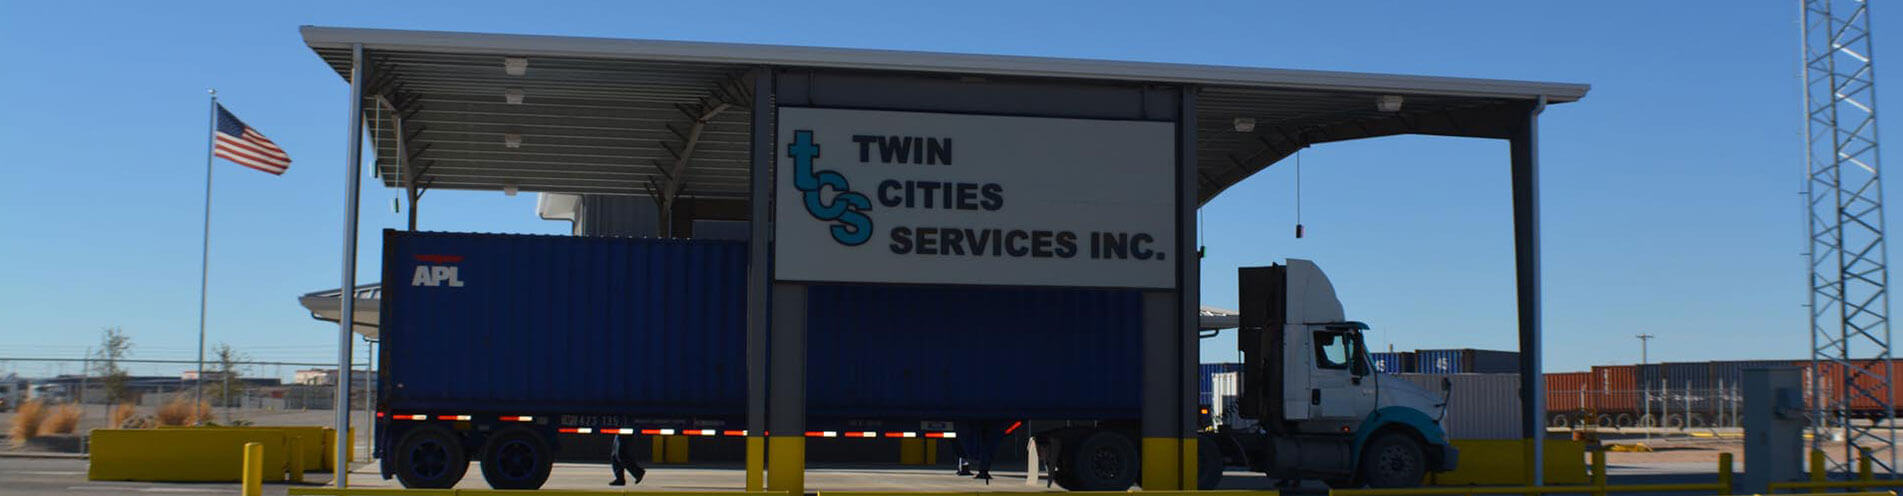 Twin Cities Services Inc.